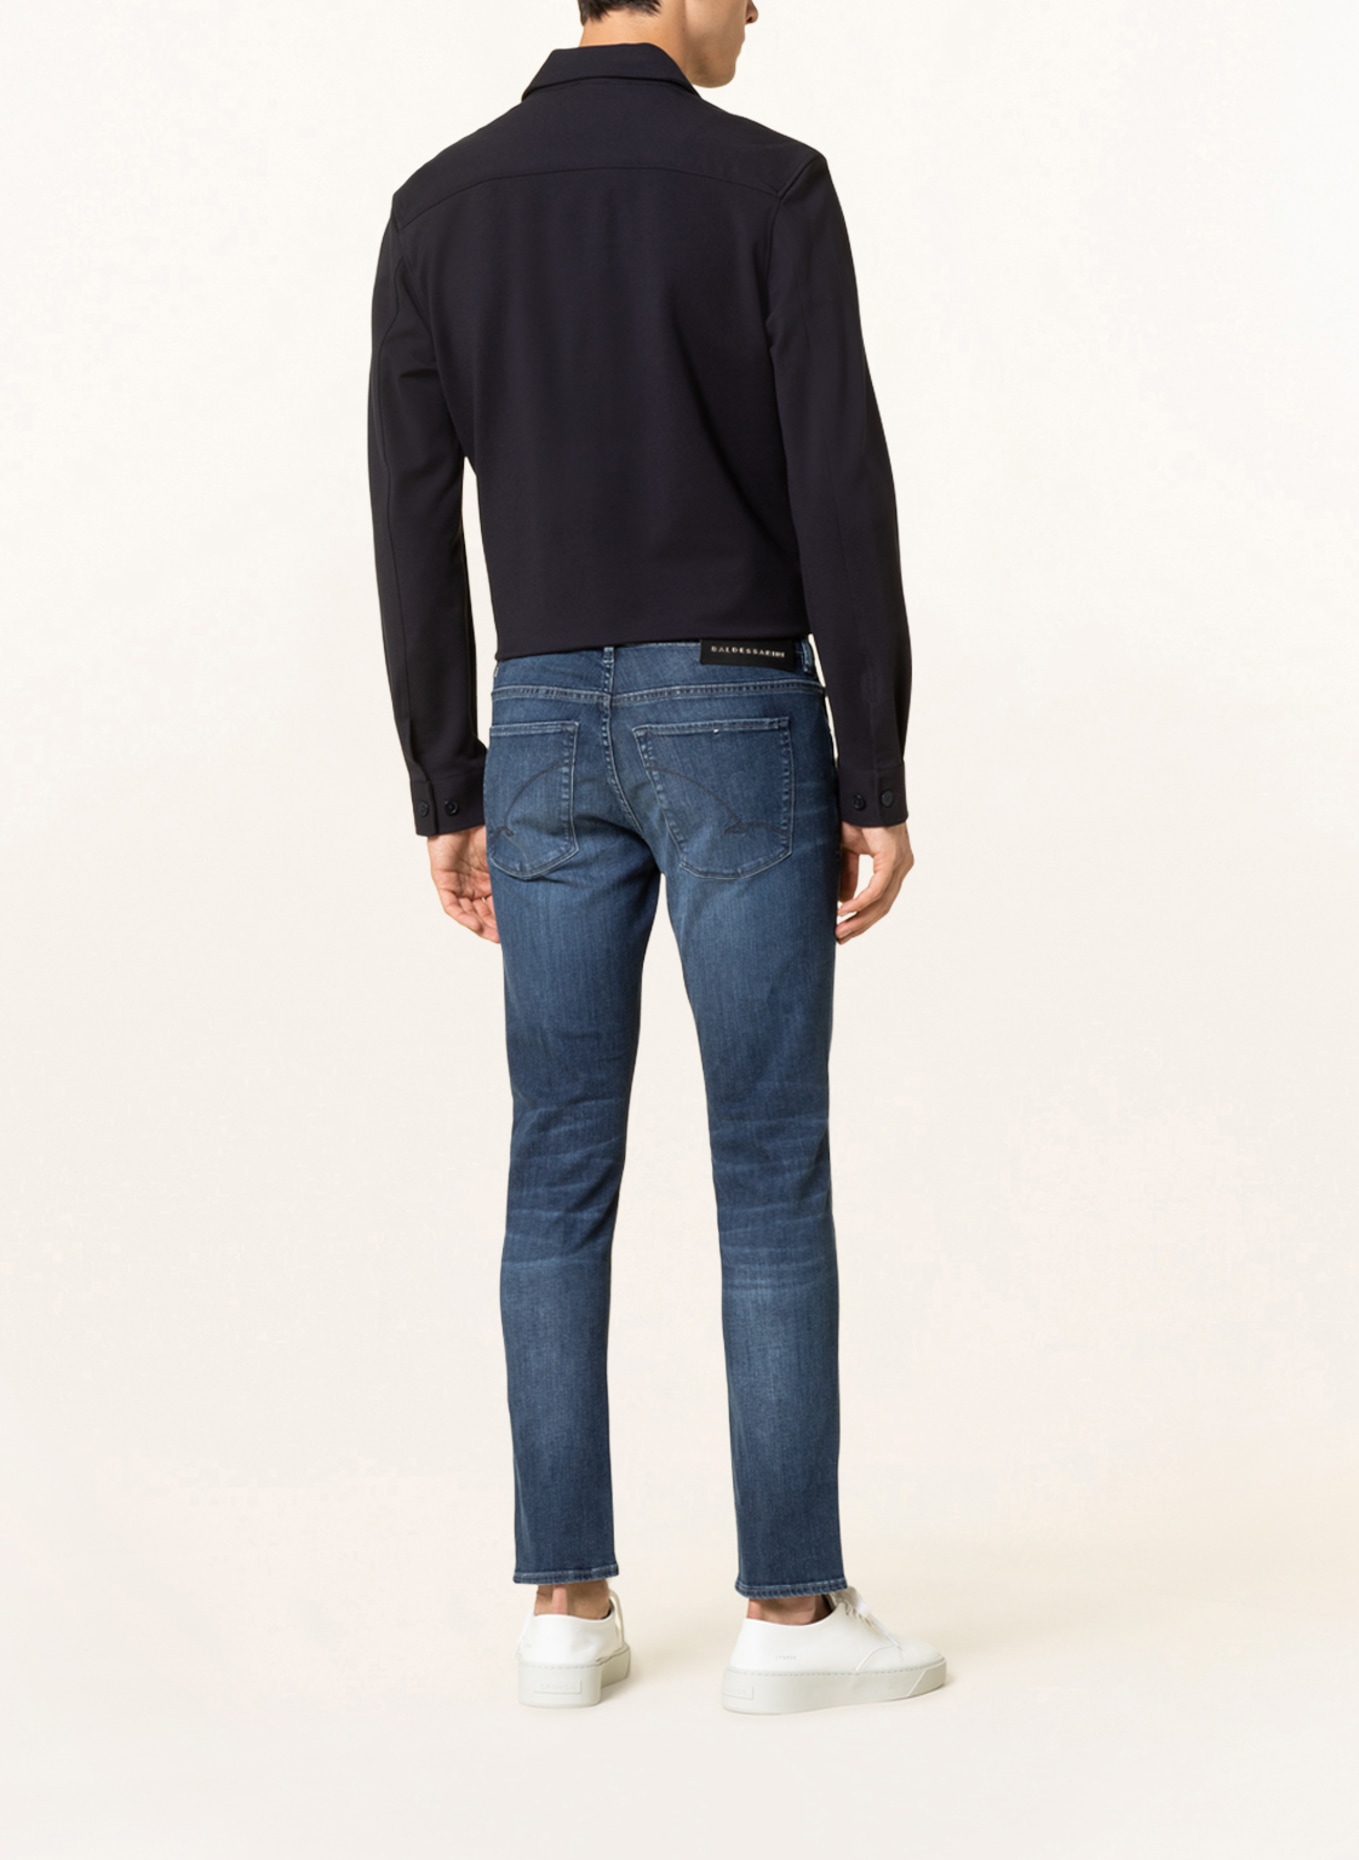 BALDESSARINI Jeans slim fit, Color: 6836 blue used buffies (Image 3)